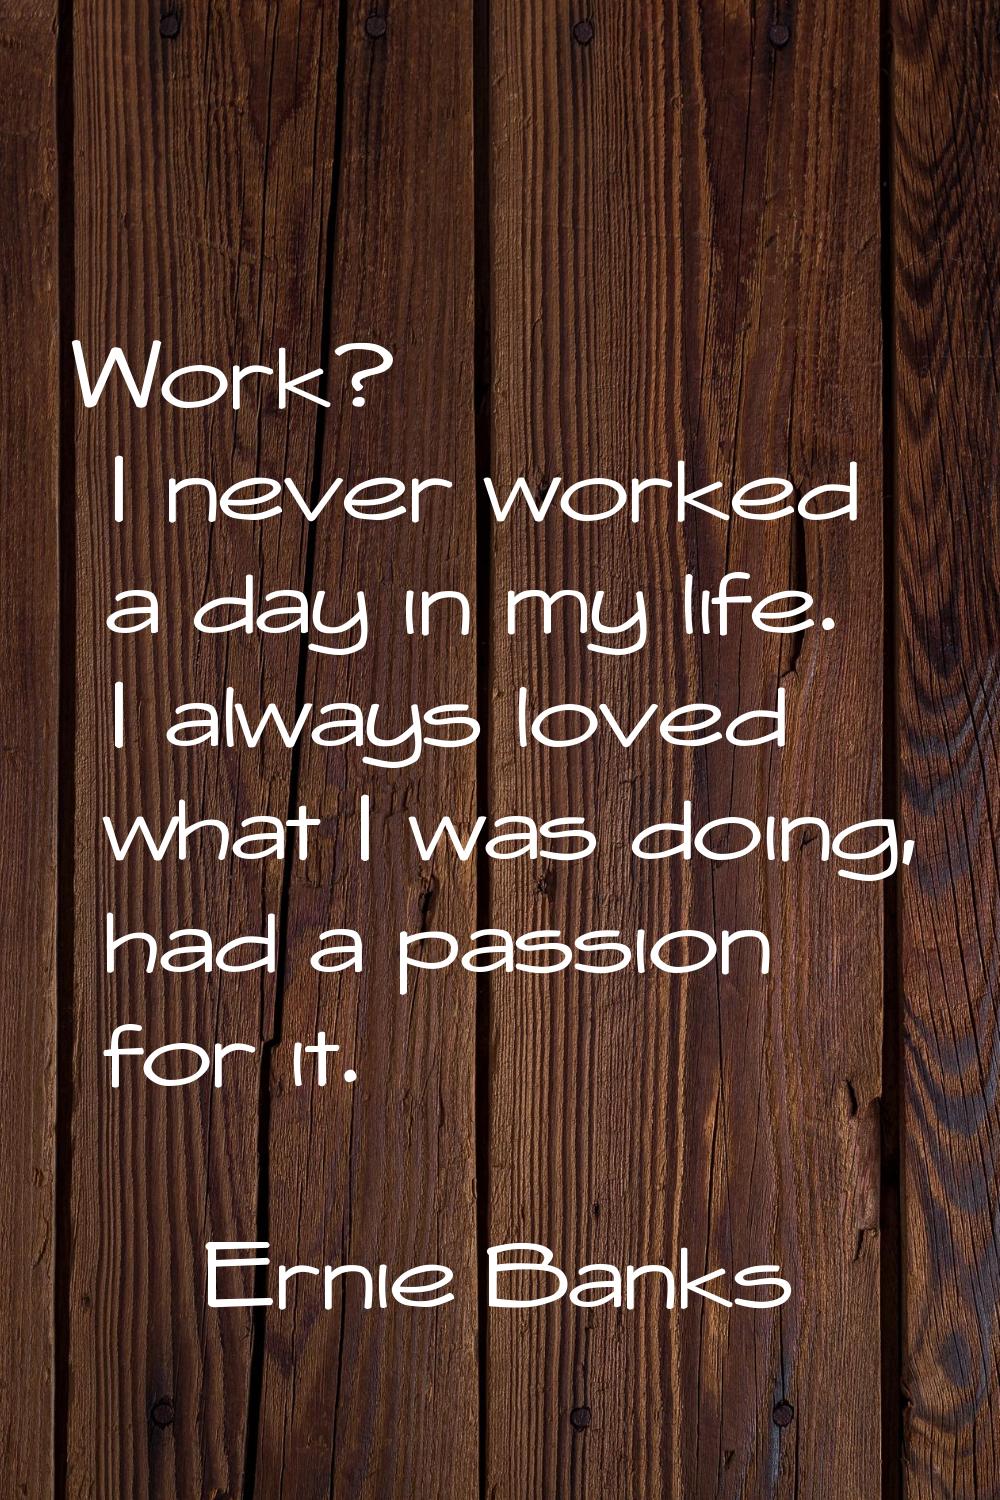 Work? I never worked a day in my life. I always loved what I was doing, had a passion for it.